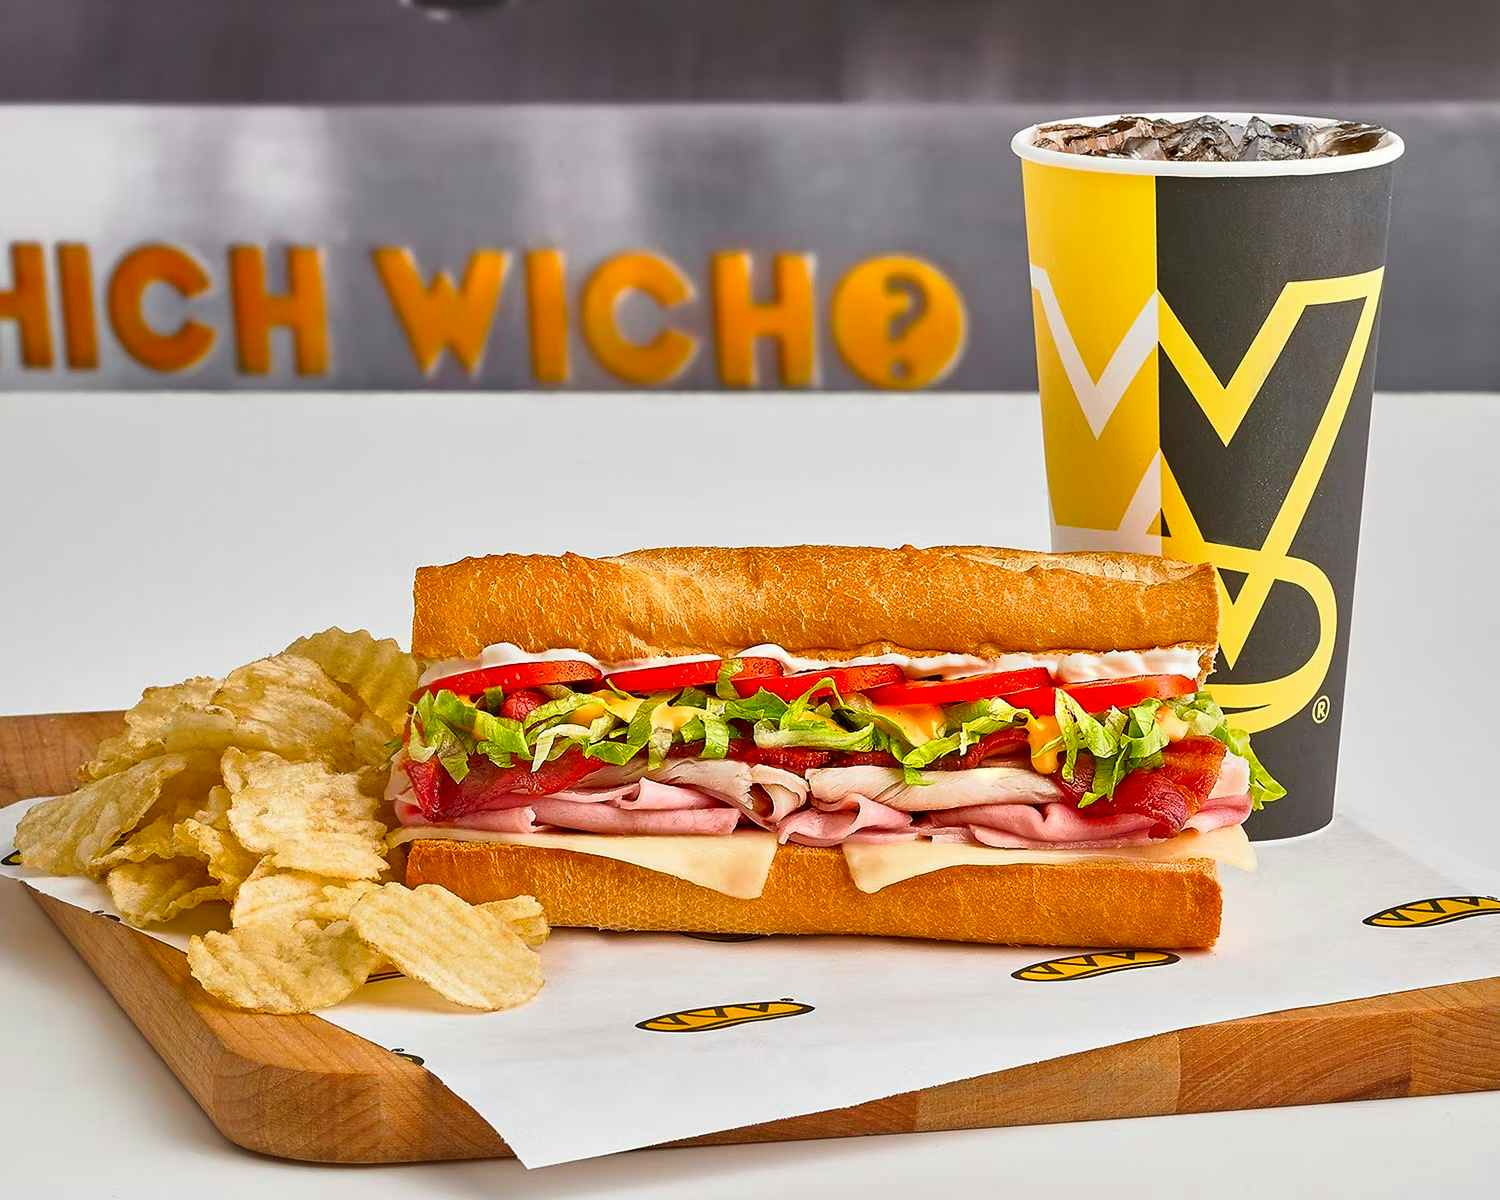 A meal from WhichWich restaurant on a table